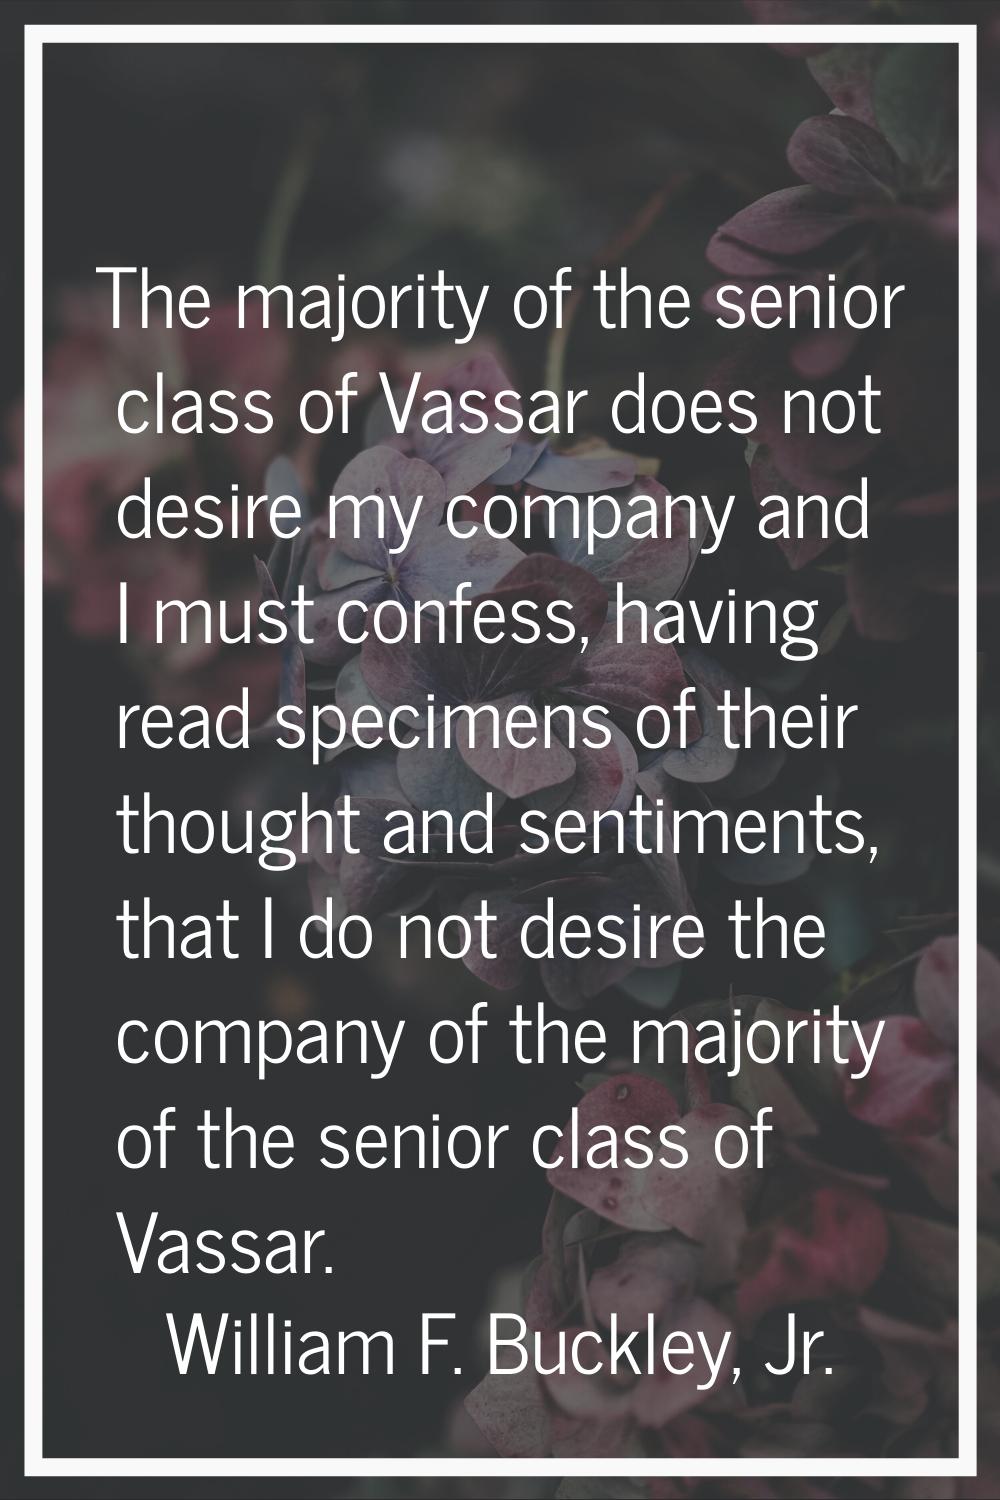 The majority of the senior class of Vassar does not desire my company and I must confess, having re